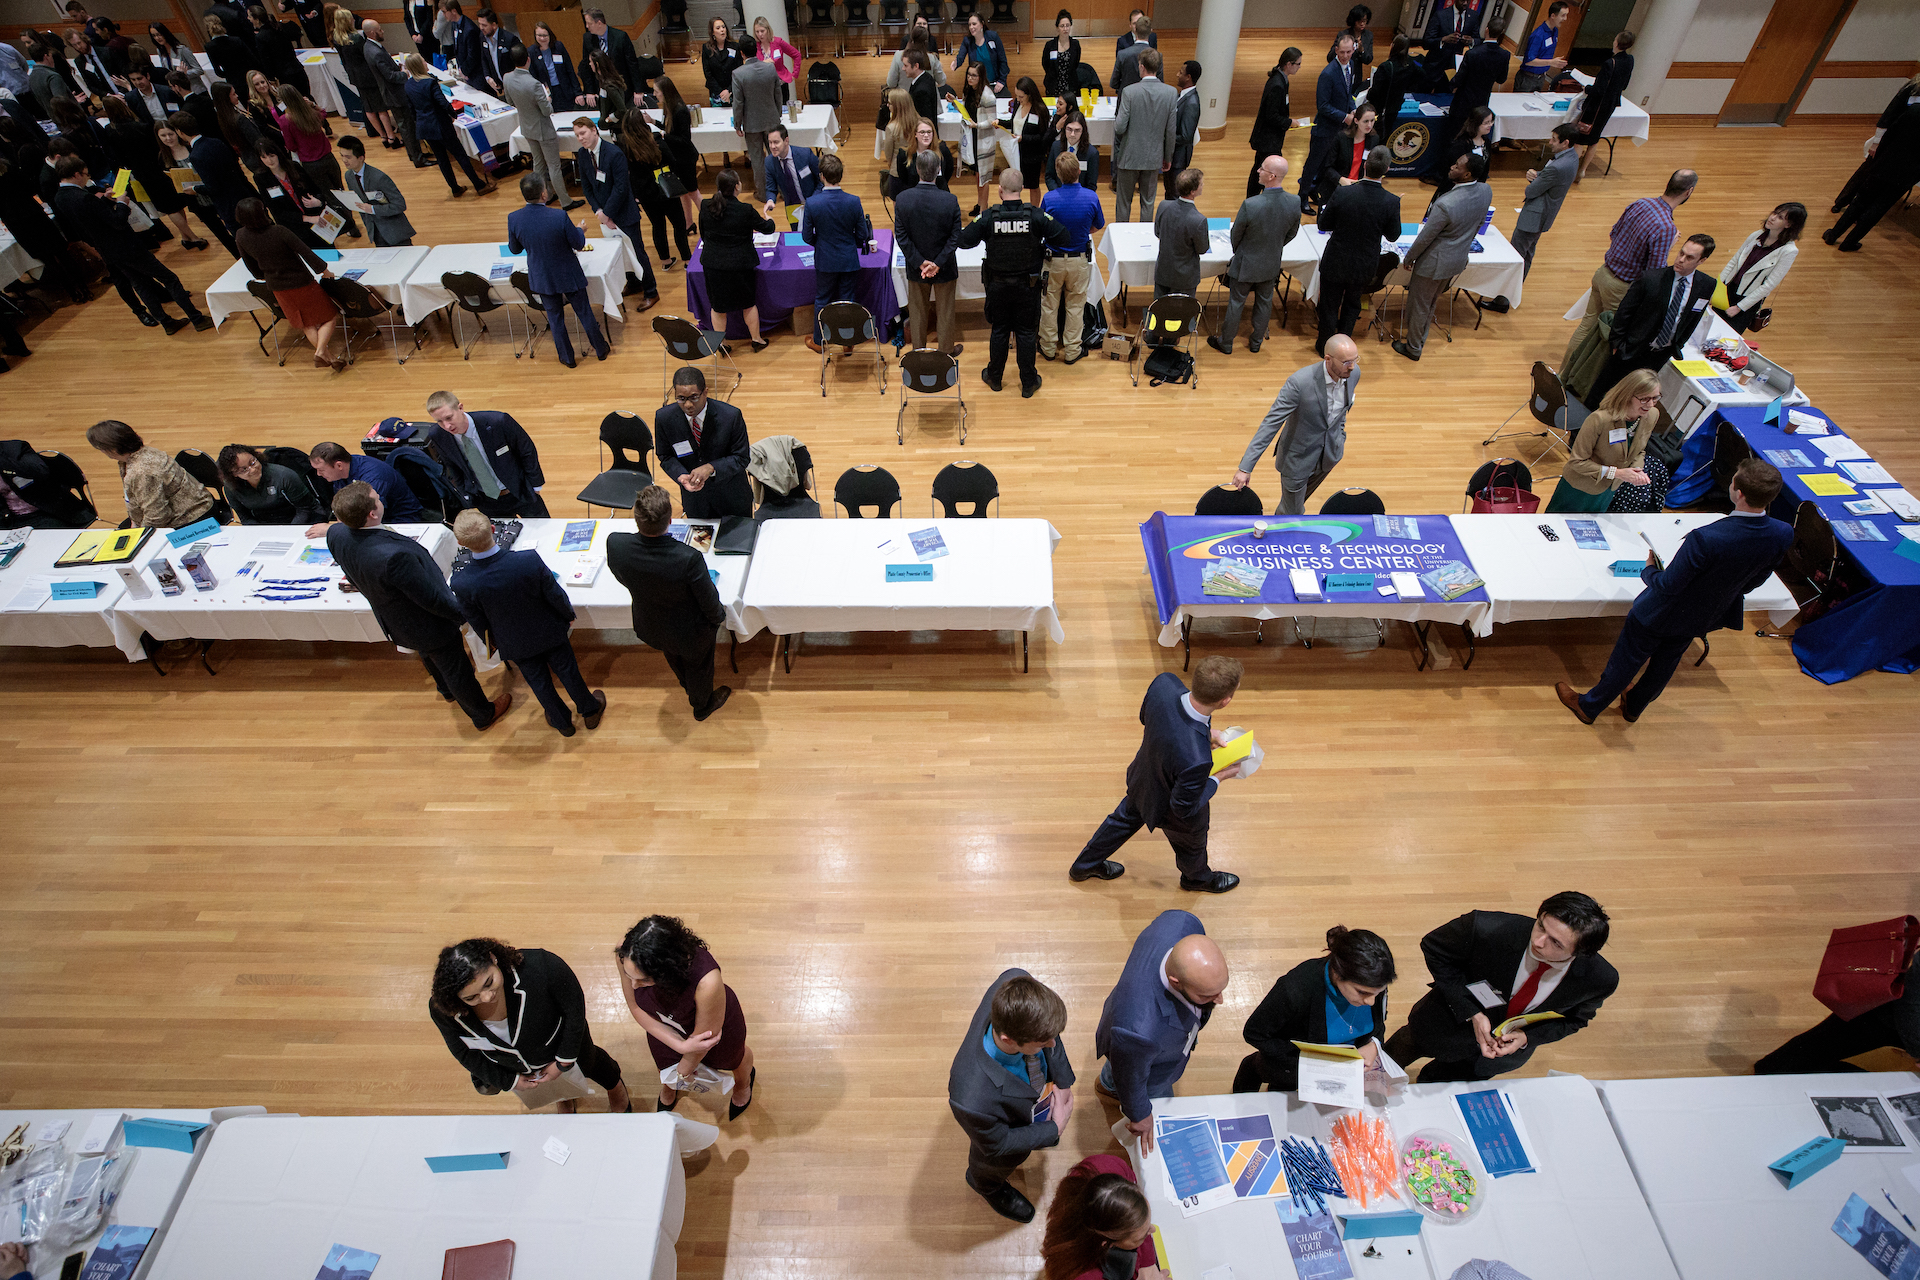 Viewed from overhead, a large number of people in professional attire walk and talk amongst tables filled with business materials.